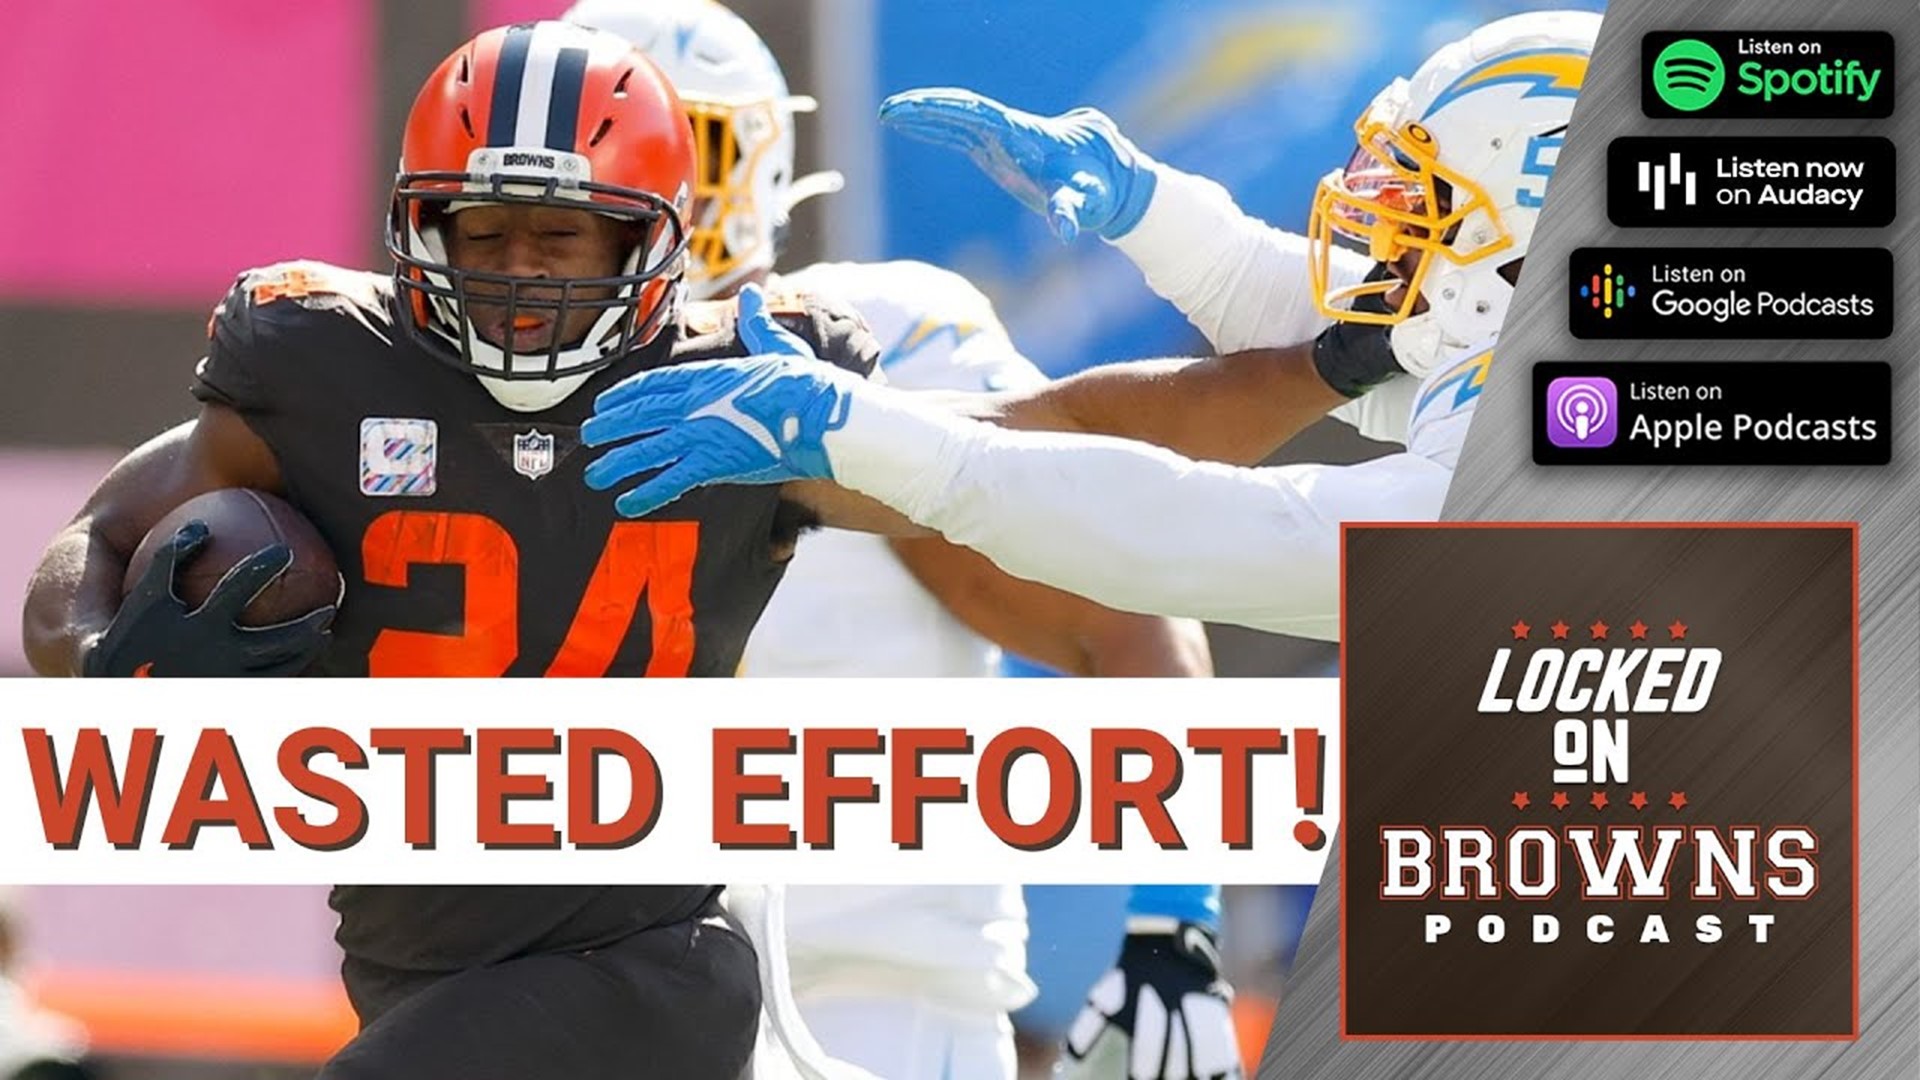 It was another disappointing loss for the Cleveland Browns after the team fell to the Chargers 30-28. Here’s our instant reaction to what happened.